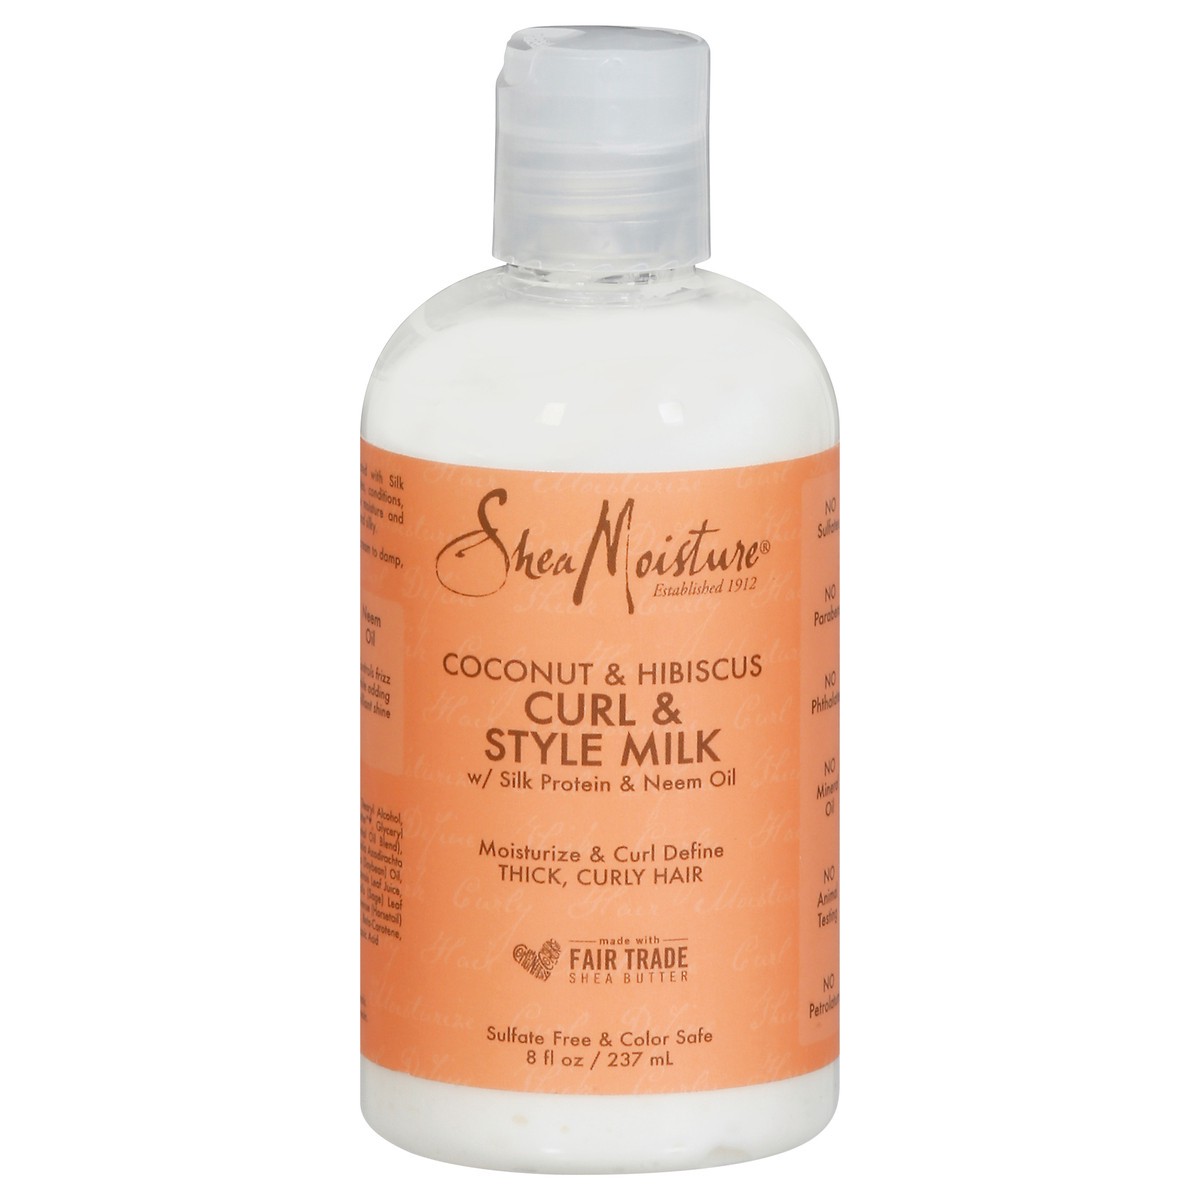 slide 1 of 73, SheaMoisture Coconut & Hibiscus Curl & Style Milk For Thick Curly Hair - 8 fl oz, 8 fl oz